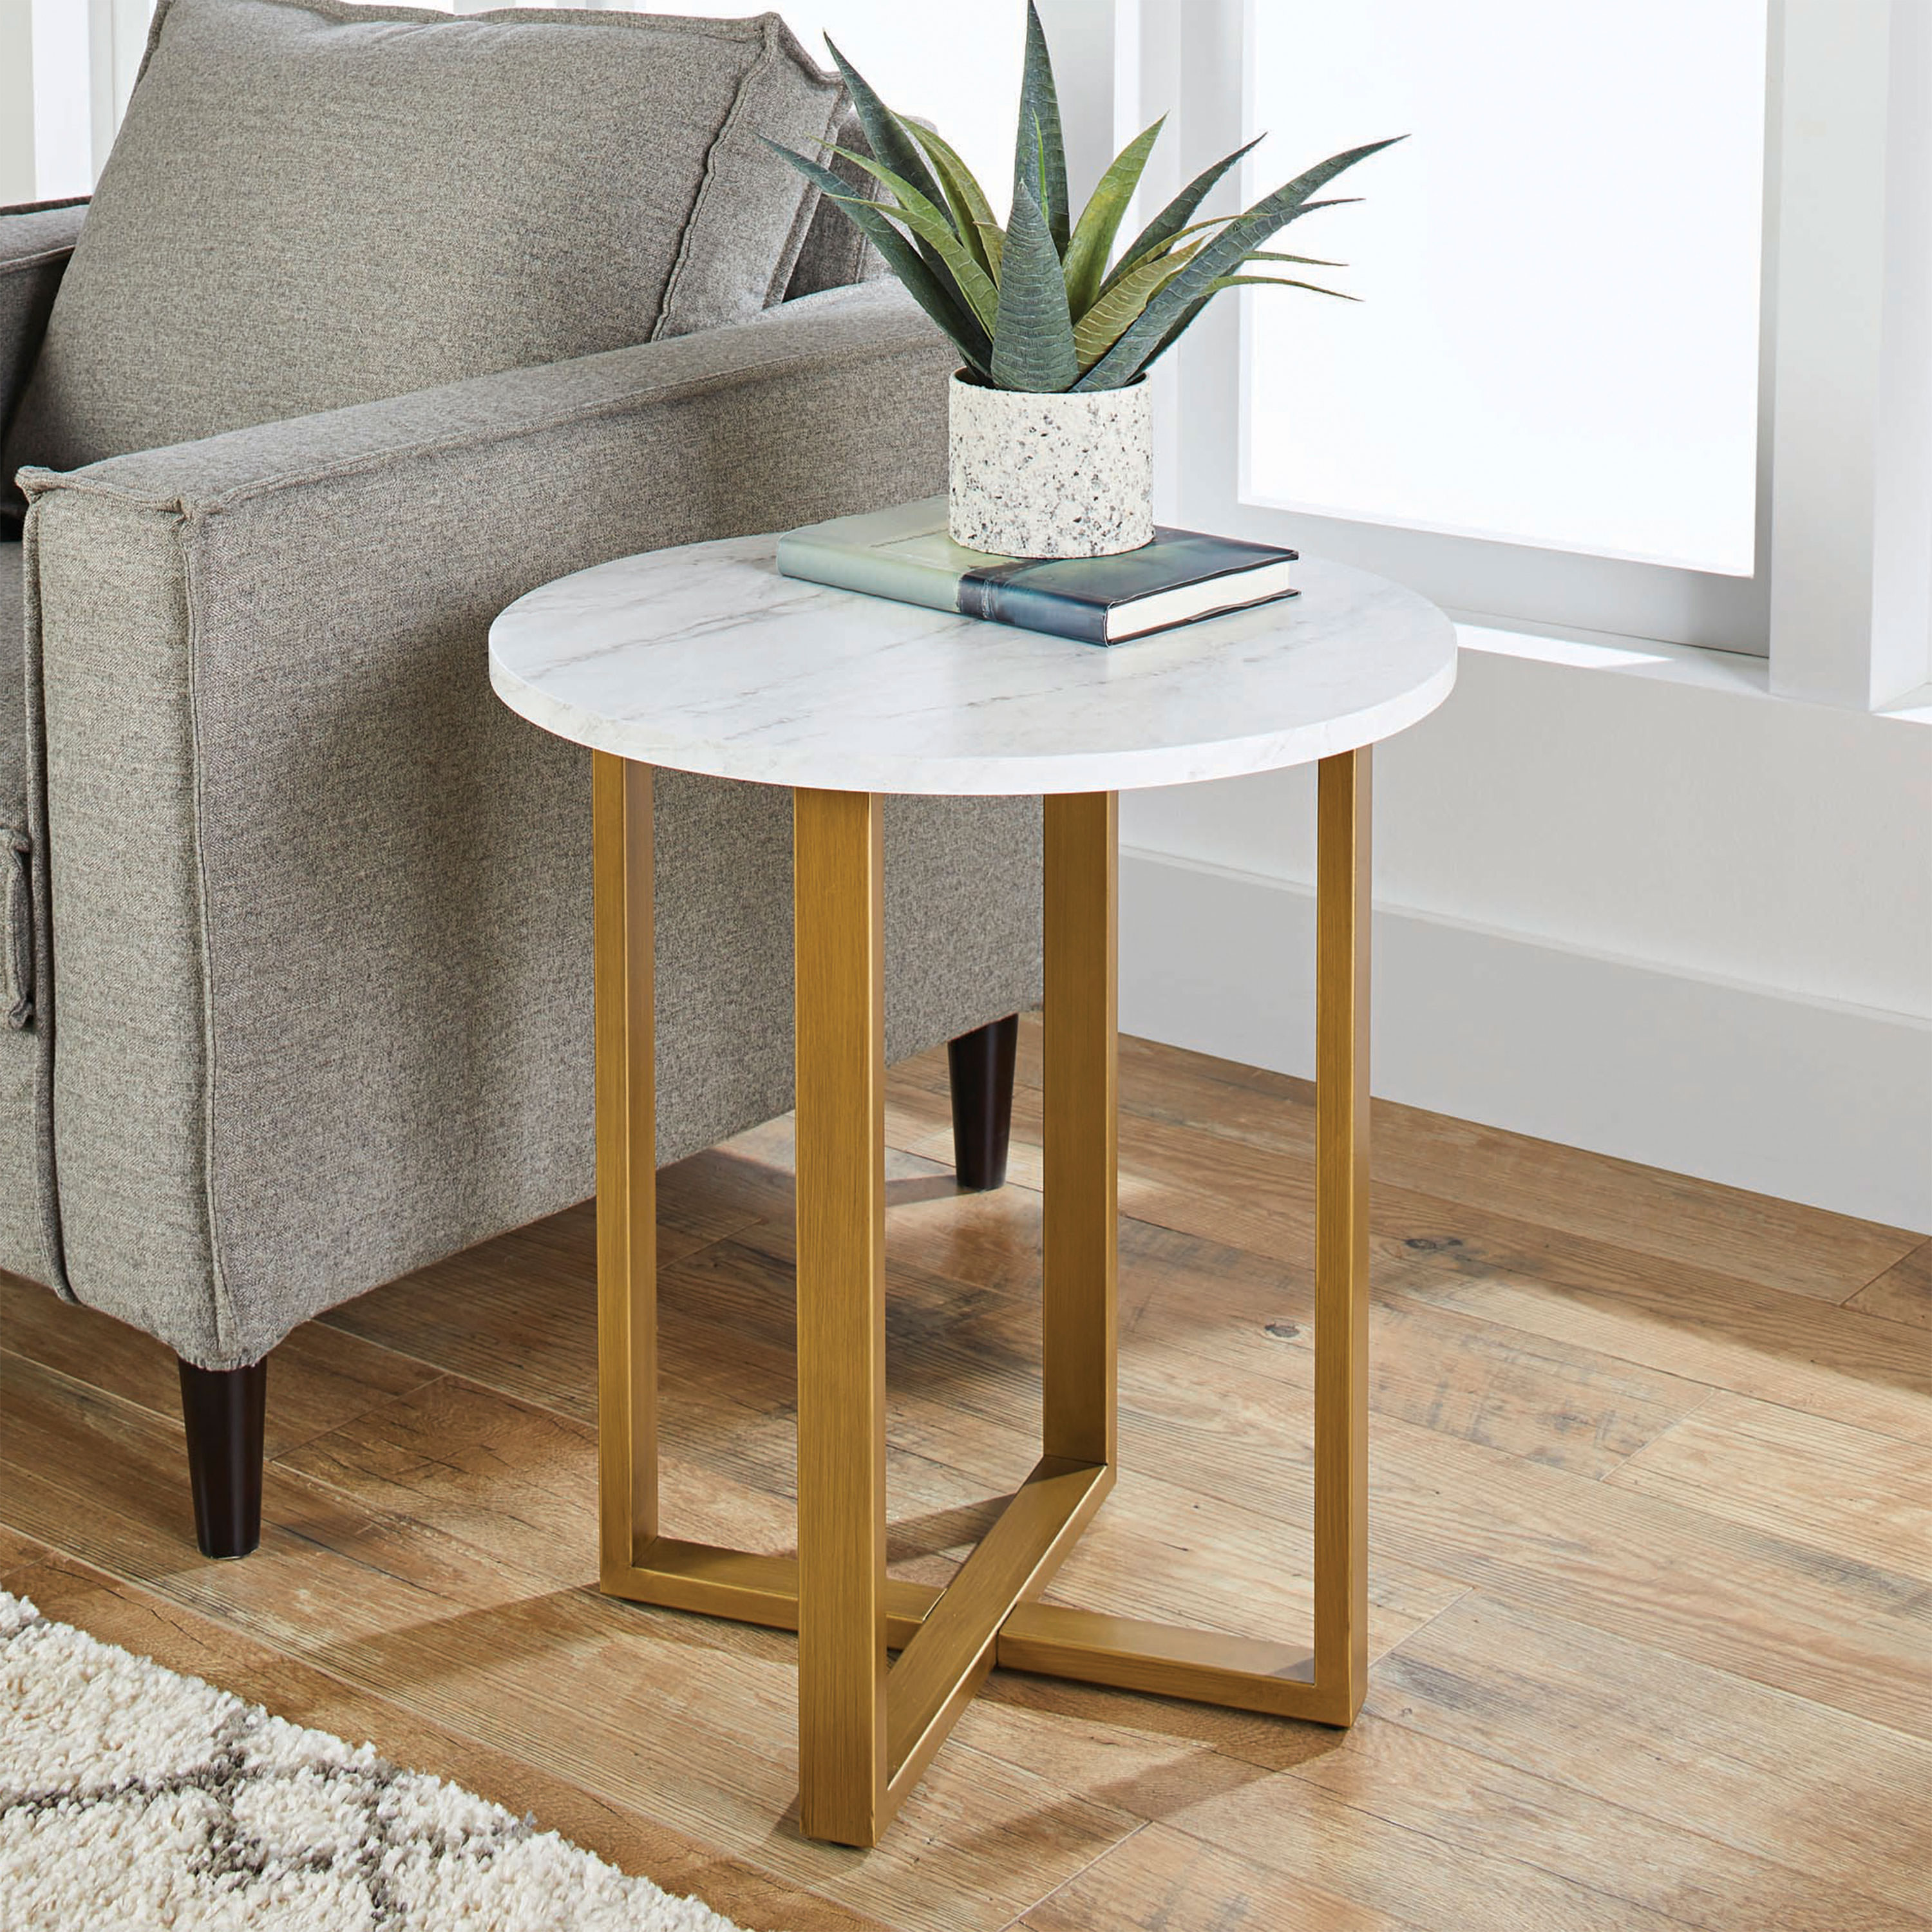 Better Homes & Gardens Lana Marble Side Table - image 1 of 5